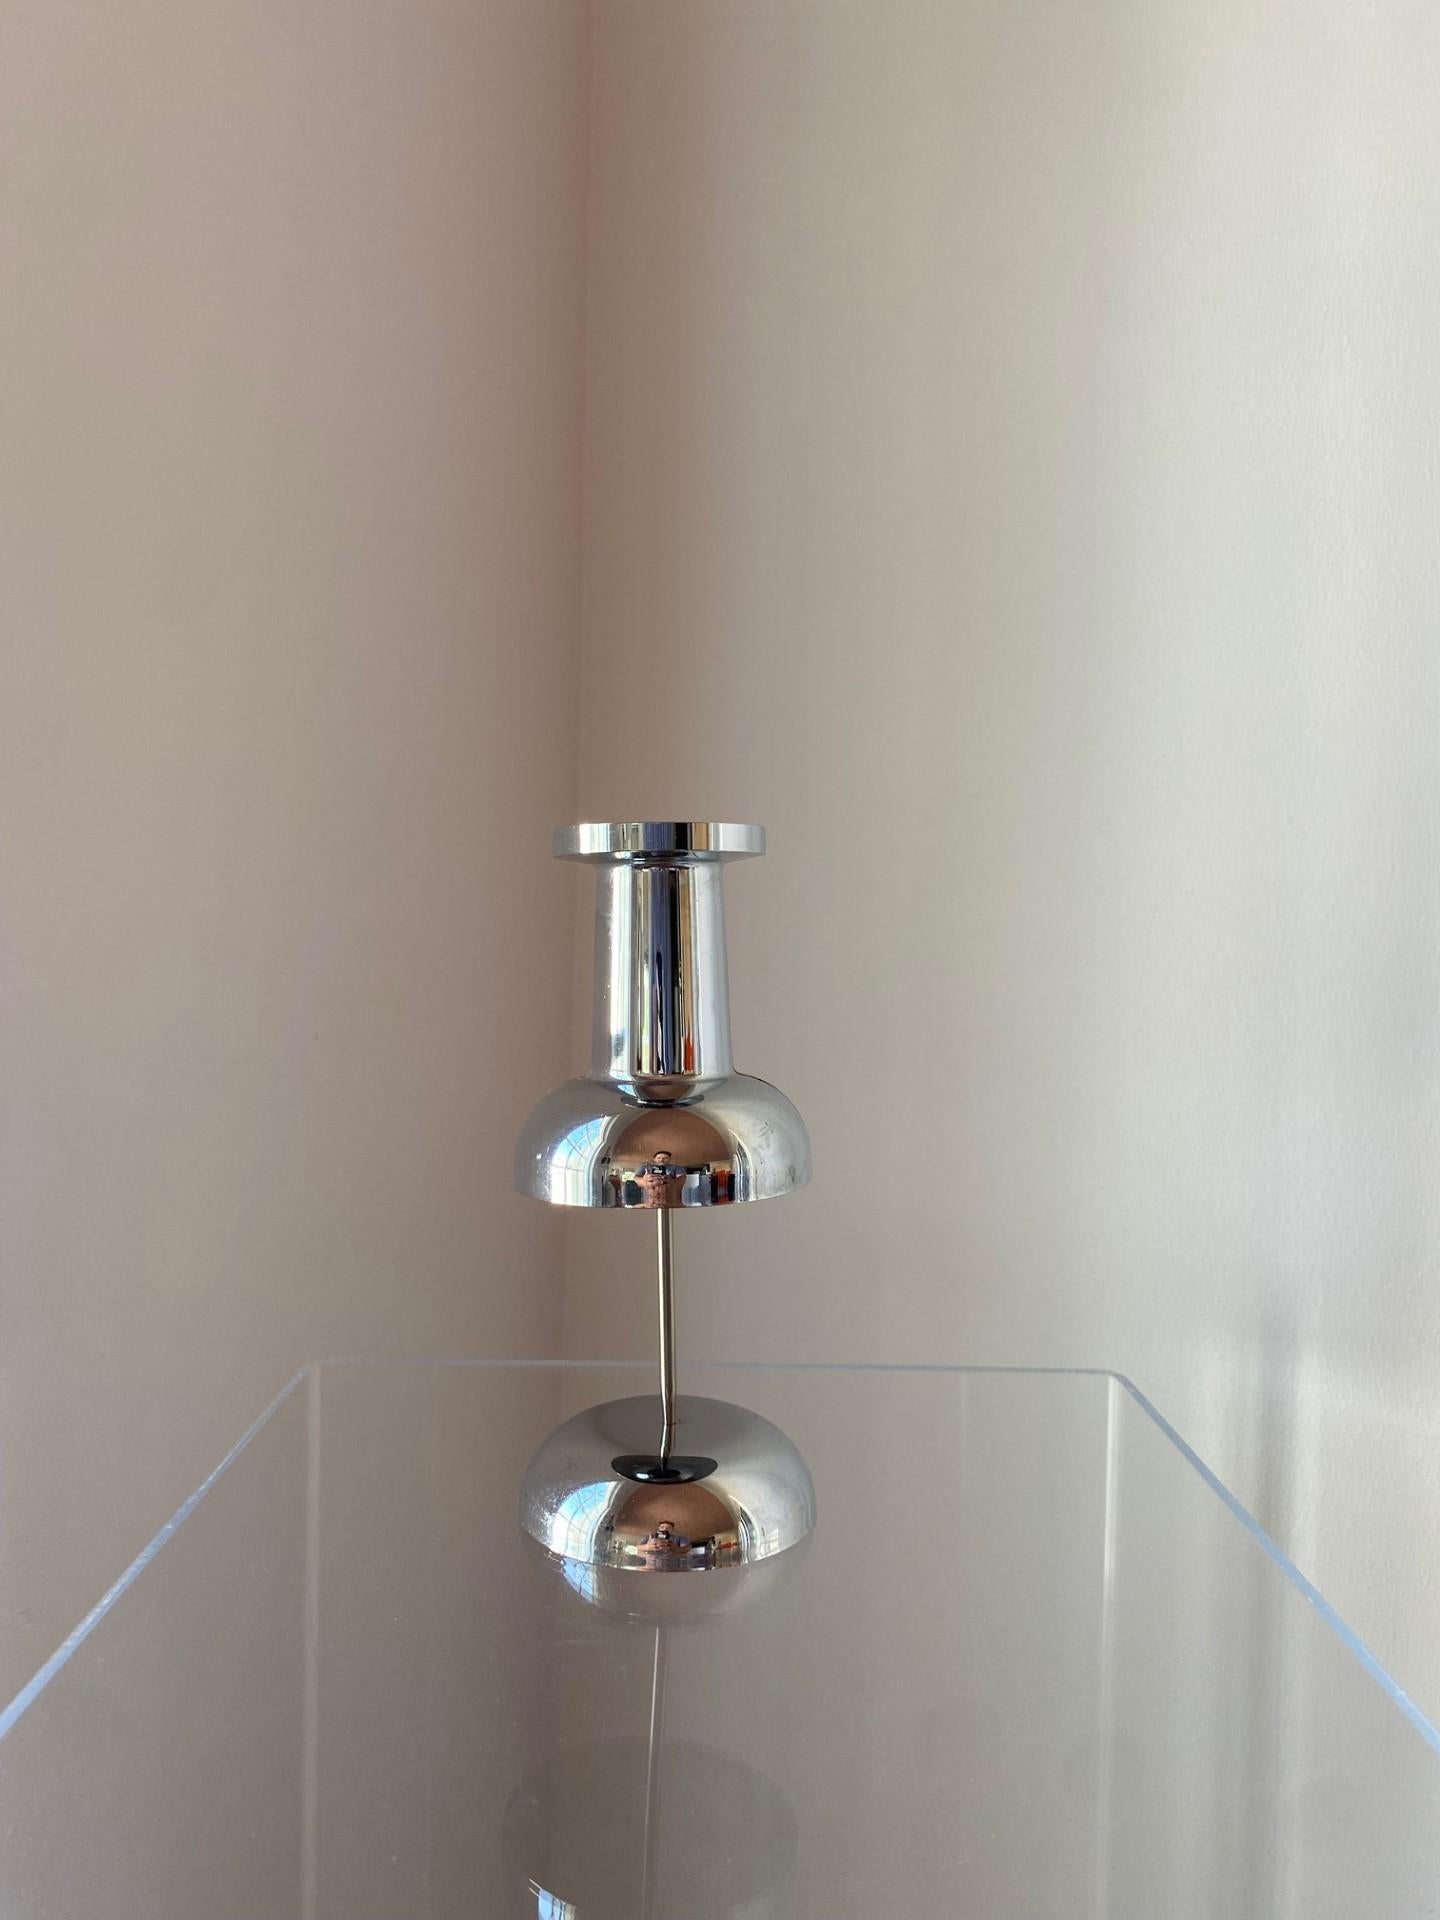 Incredibly cool push pin sculpture in an oversized presentation.  This piece is 8